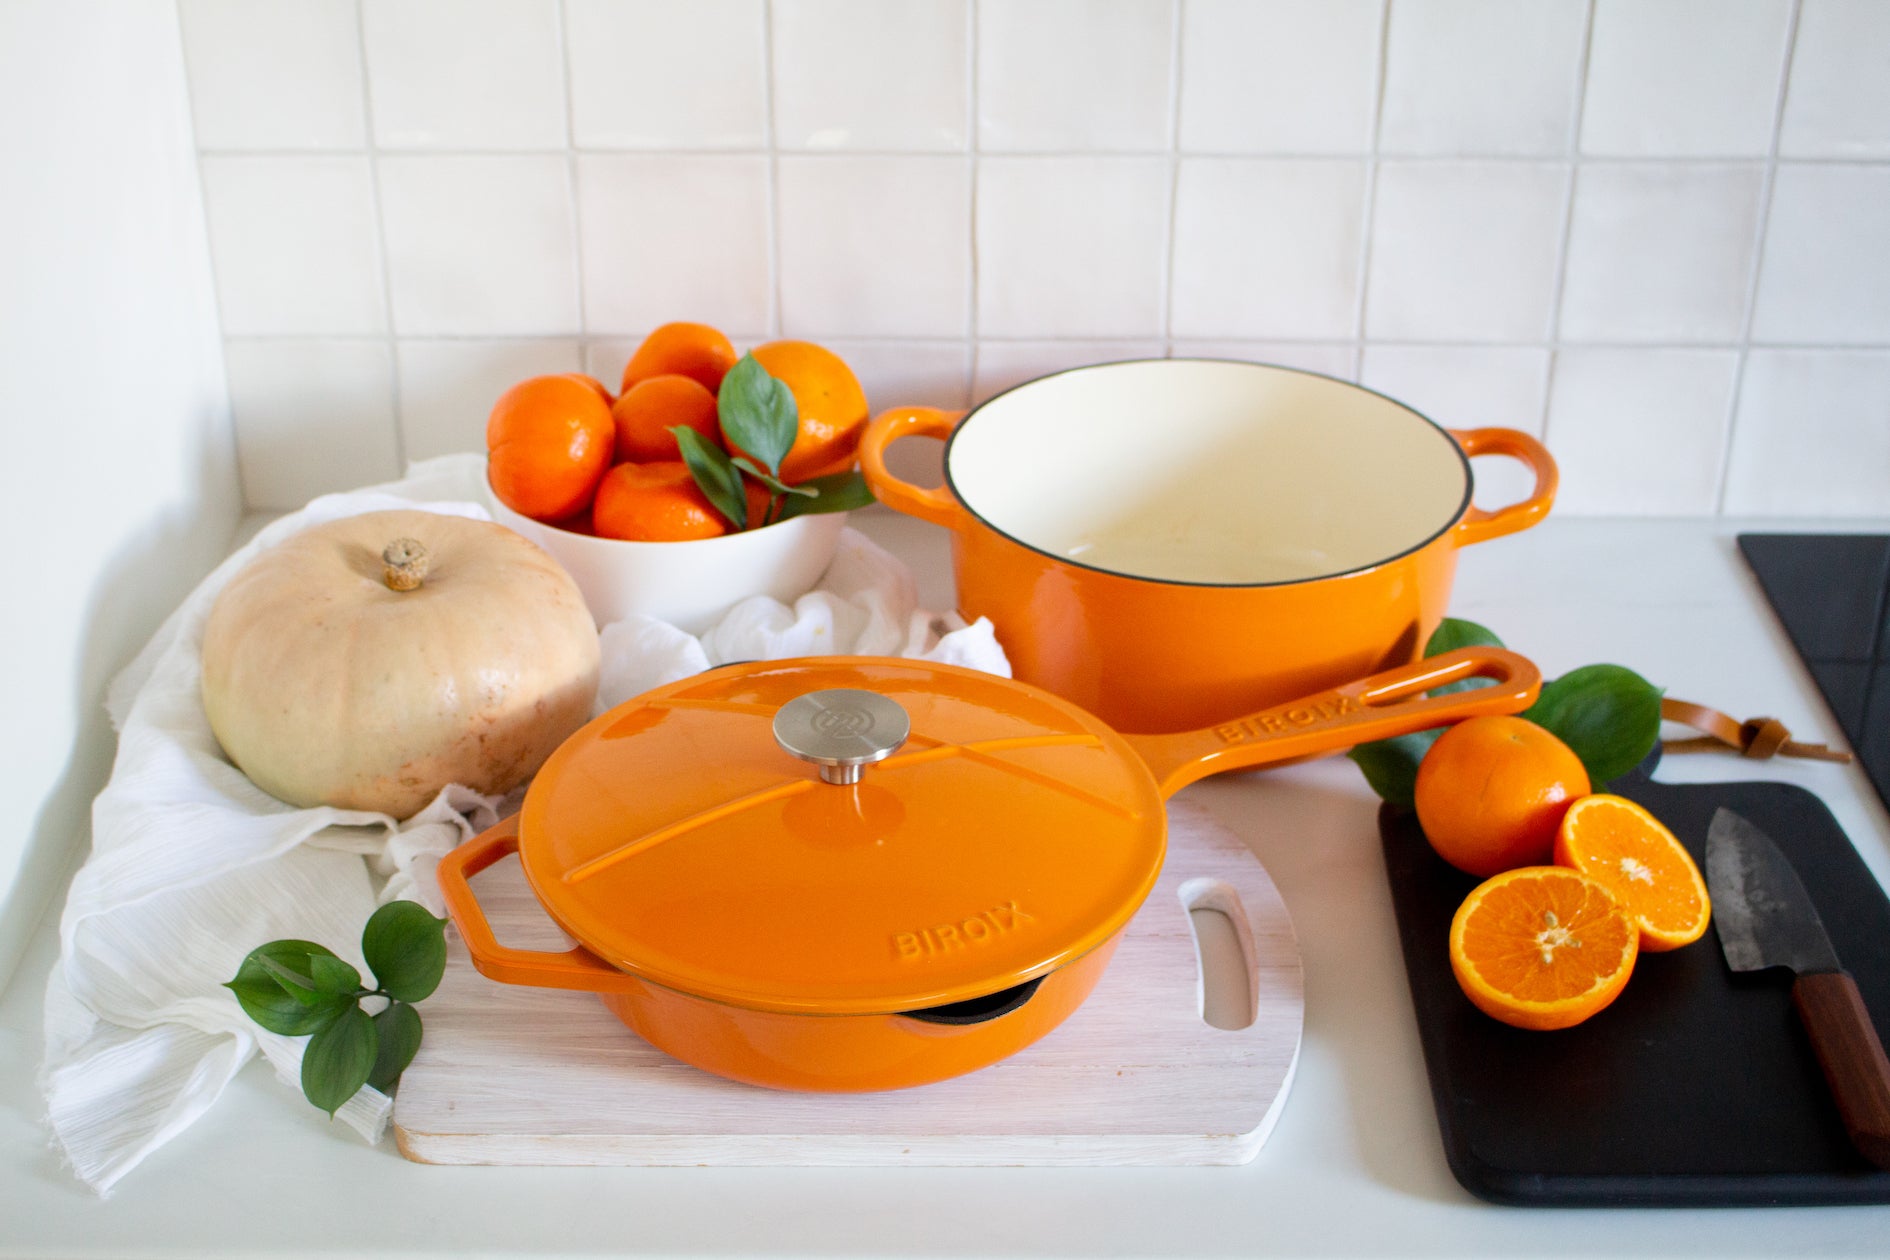 Difference: Traditional Cast Iron Vs. Enamel Coated Cast Iron